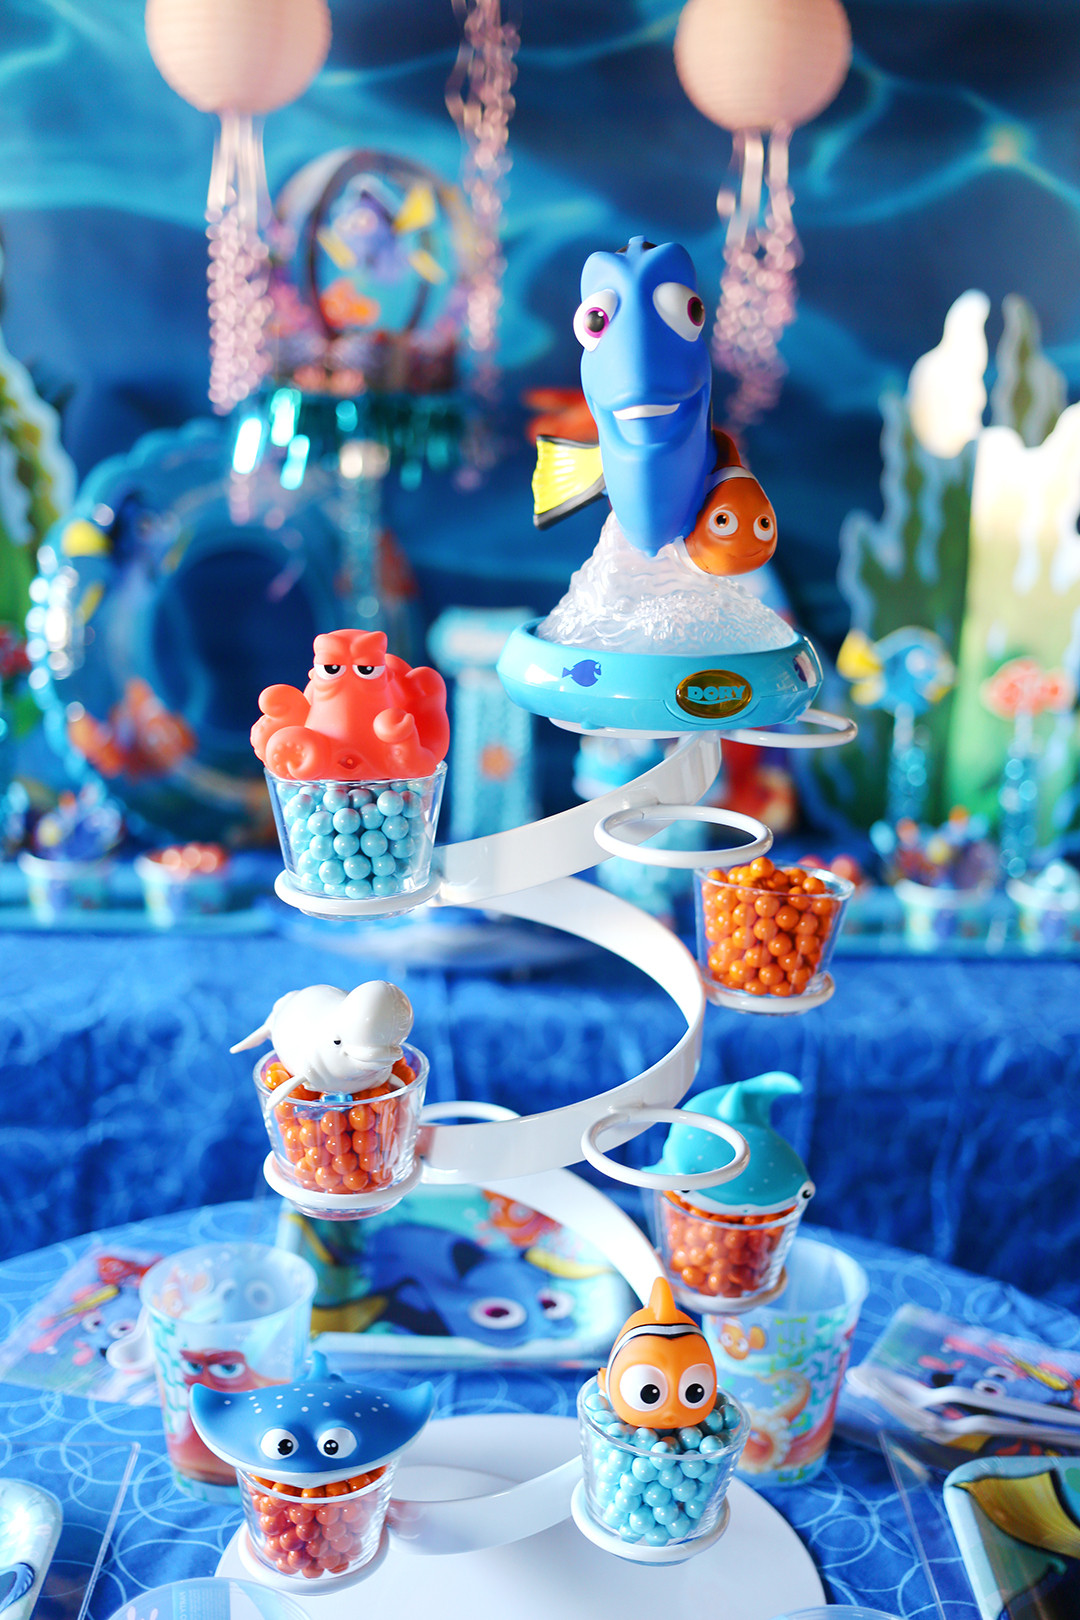 Finding Dory Pool Party Ideas
 Finding Dory Inspired Pool Party